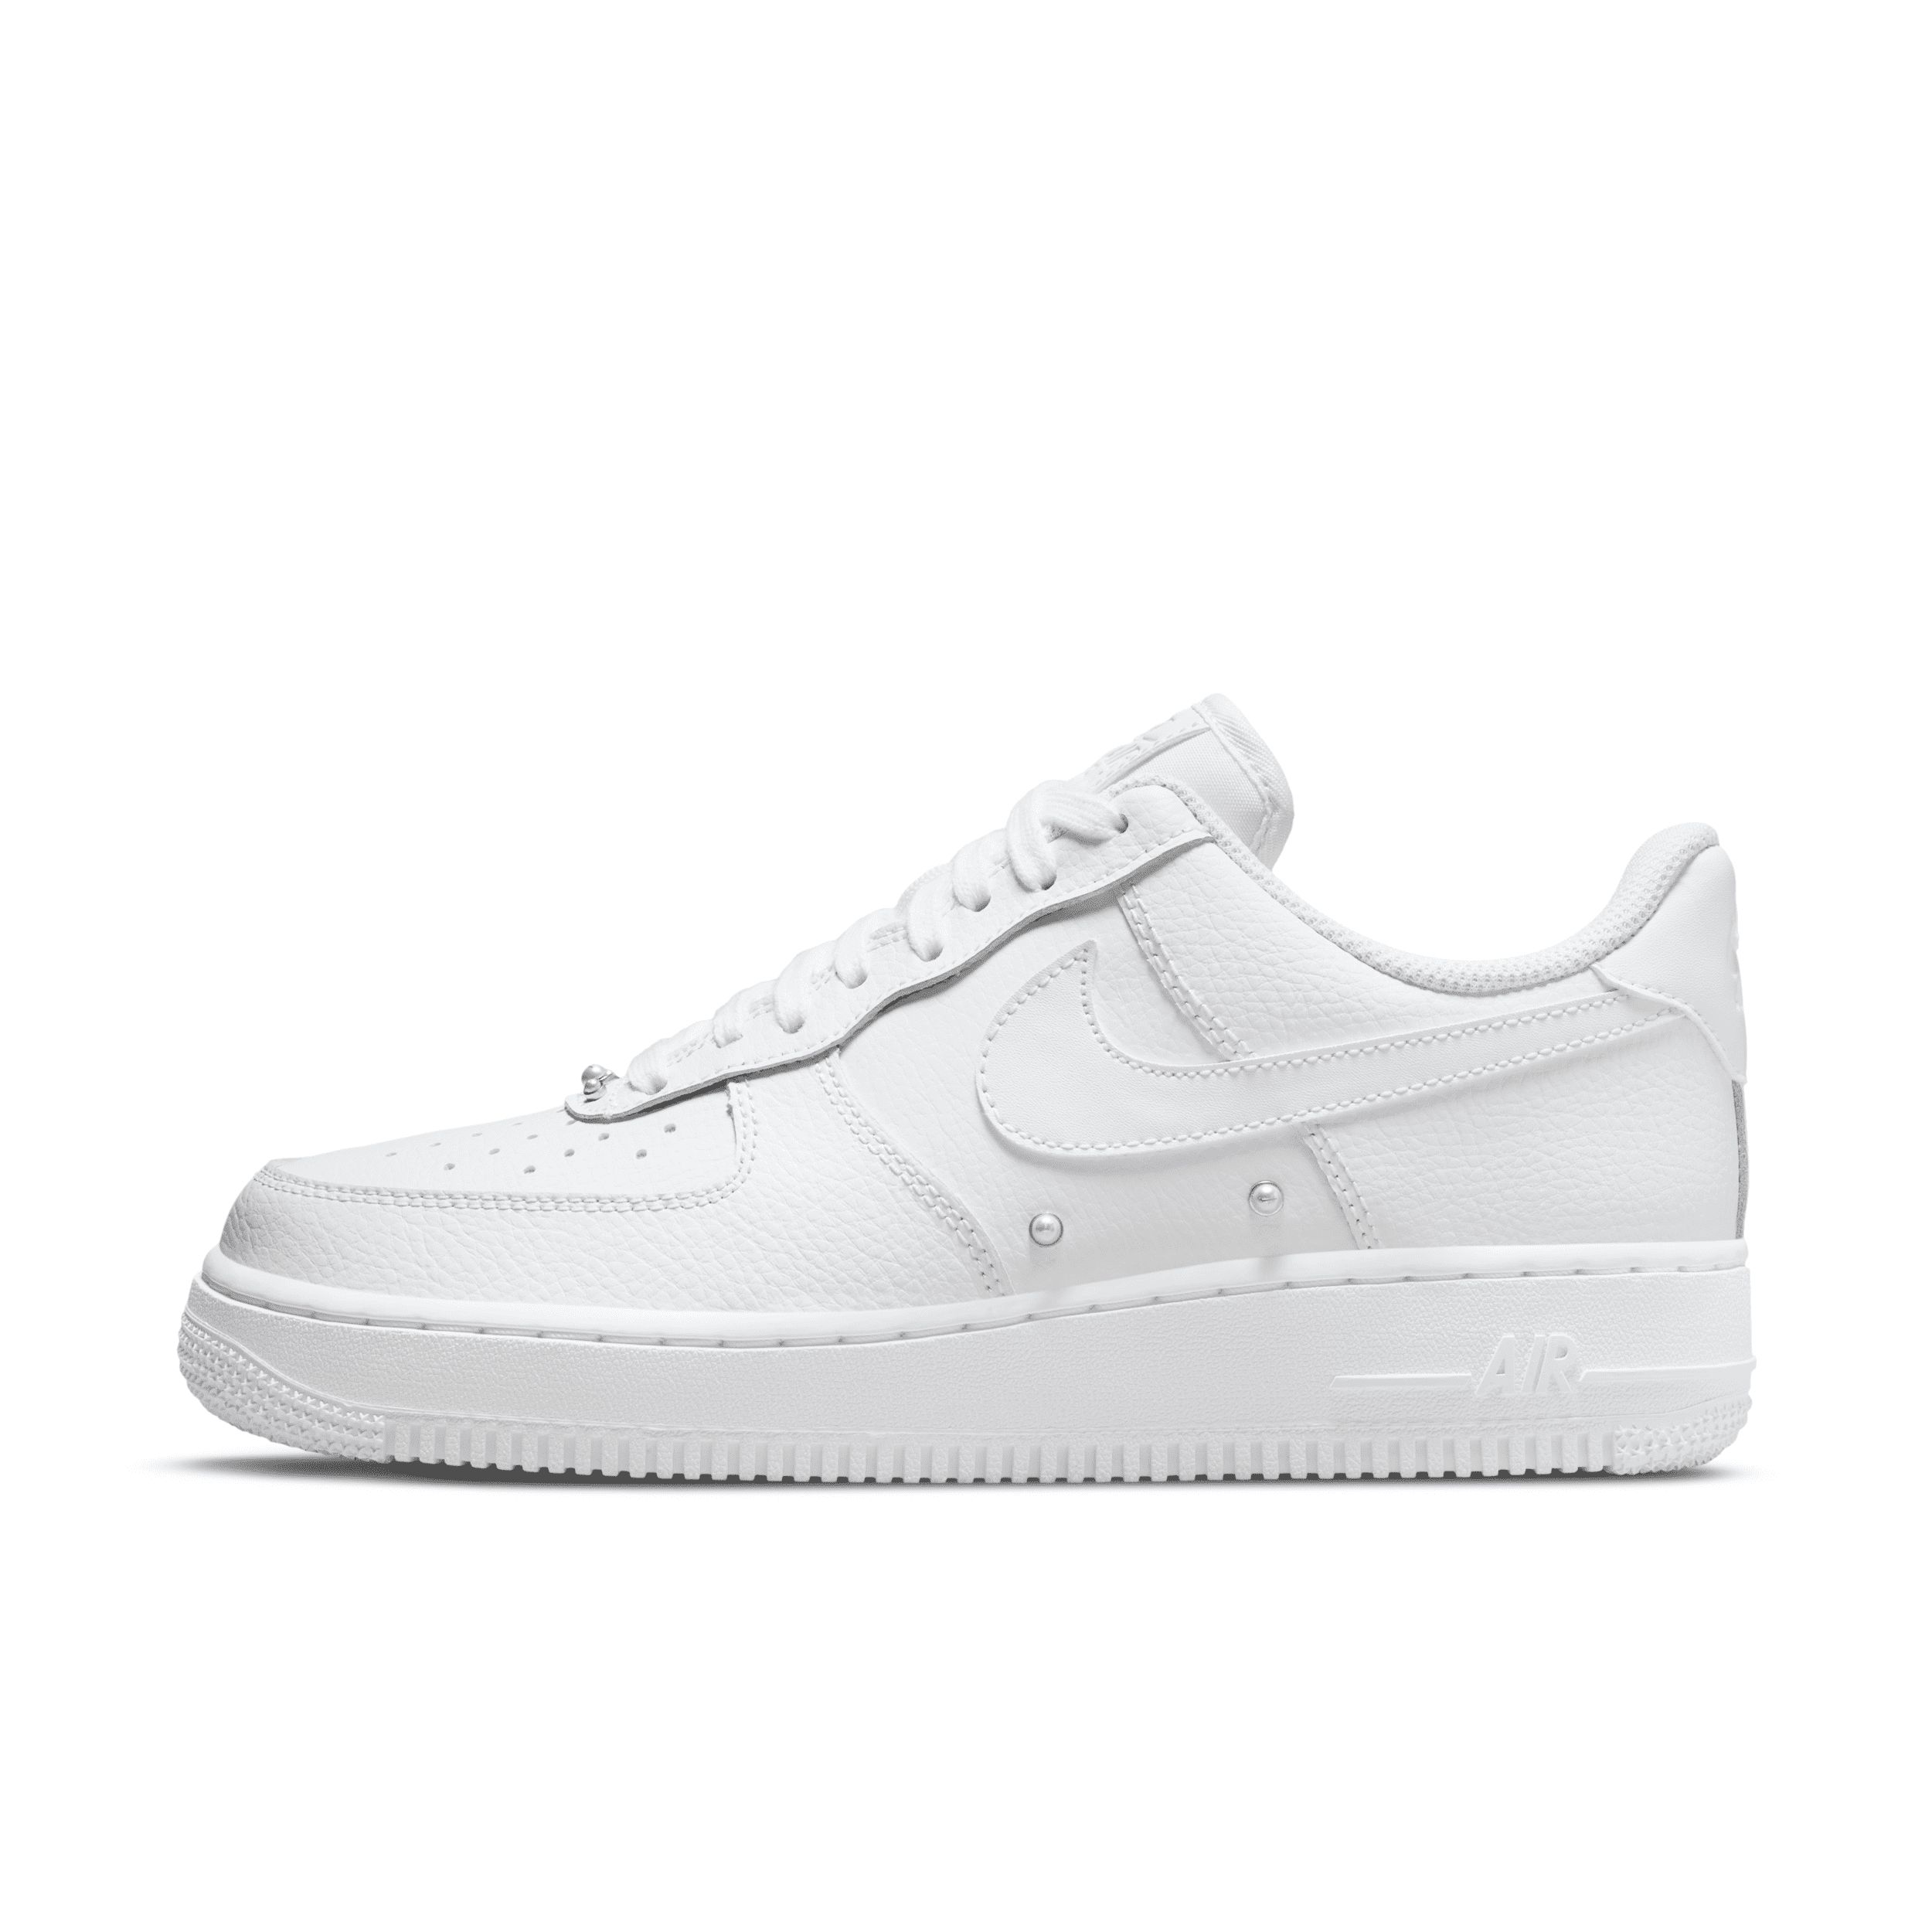 Nike Women's Air Force 1 '07 SE Shoes in White, Size: 11 | DQ0231-100 | Nike (US)